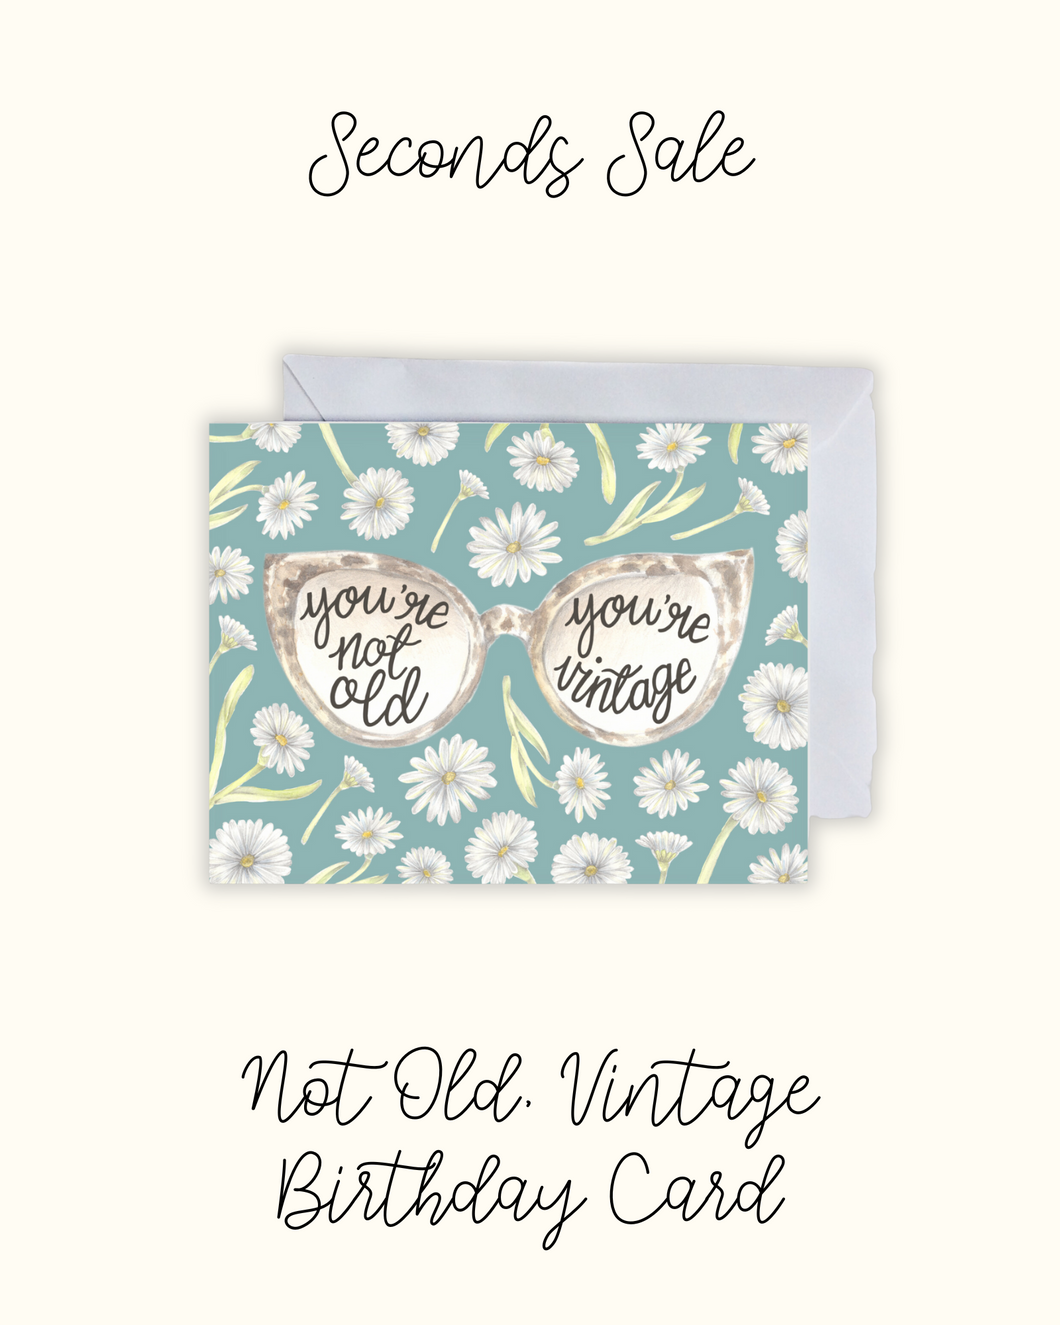 You're Not Old, You're Vintage Birthday Card - Seconds Sale